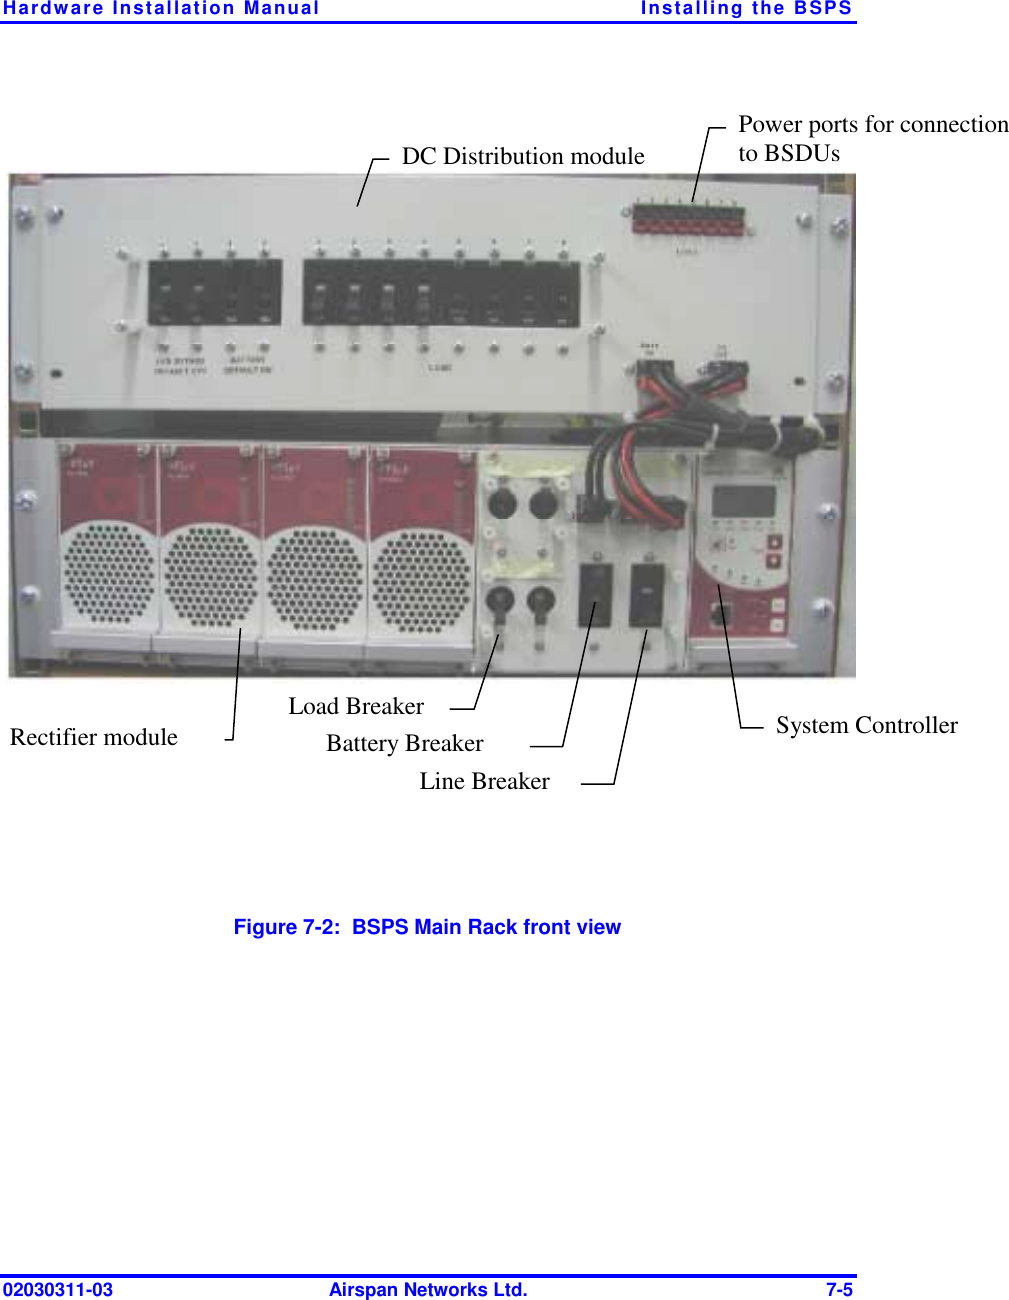 Hardware Installation Manual  Installing the BSPS 02030311-03  Airspan Networks Ltd.  7-5  System Controller Line Breaker Battery Breaker Load Breaker Rectifier module DC Distribution module Power ports for connection to BSDUs  Figure  7-2:  BSPS Main Rack front view 